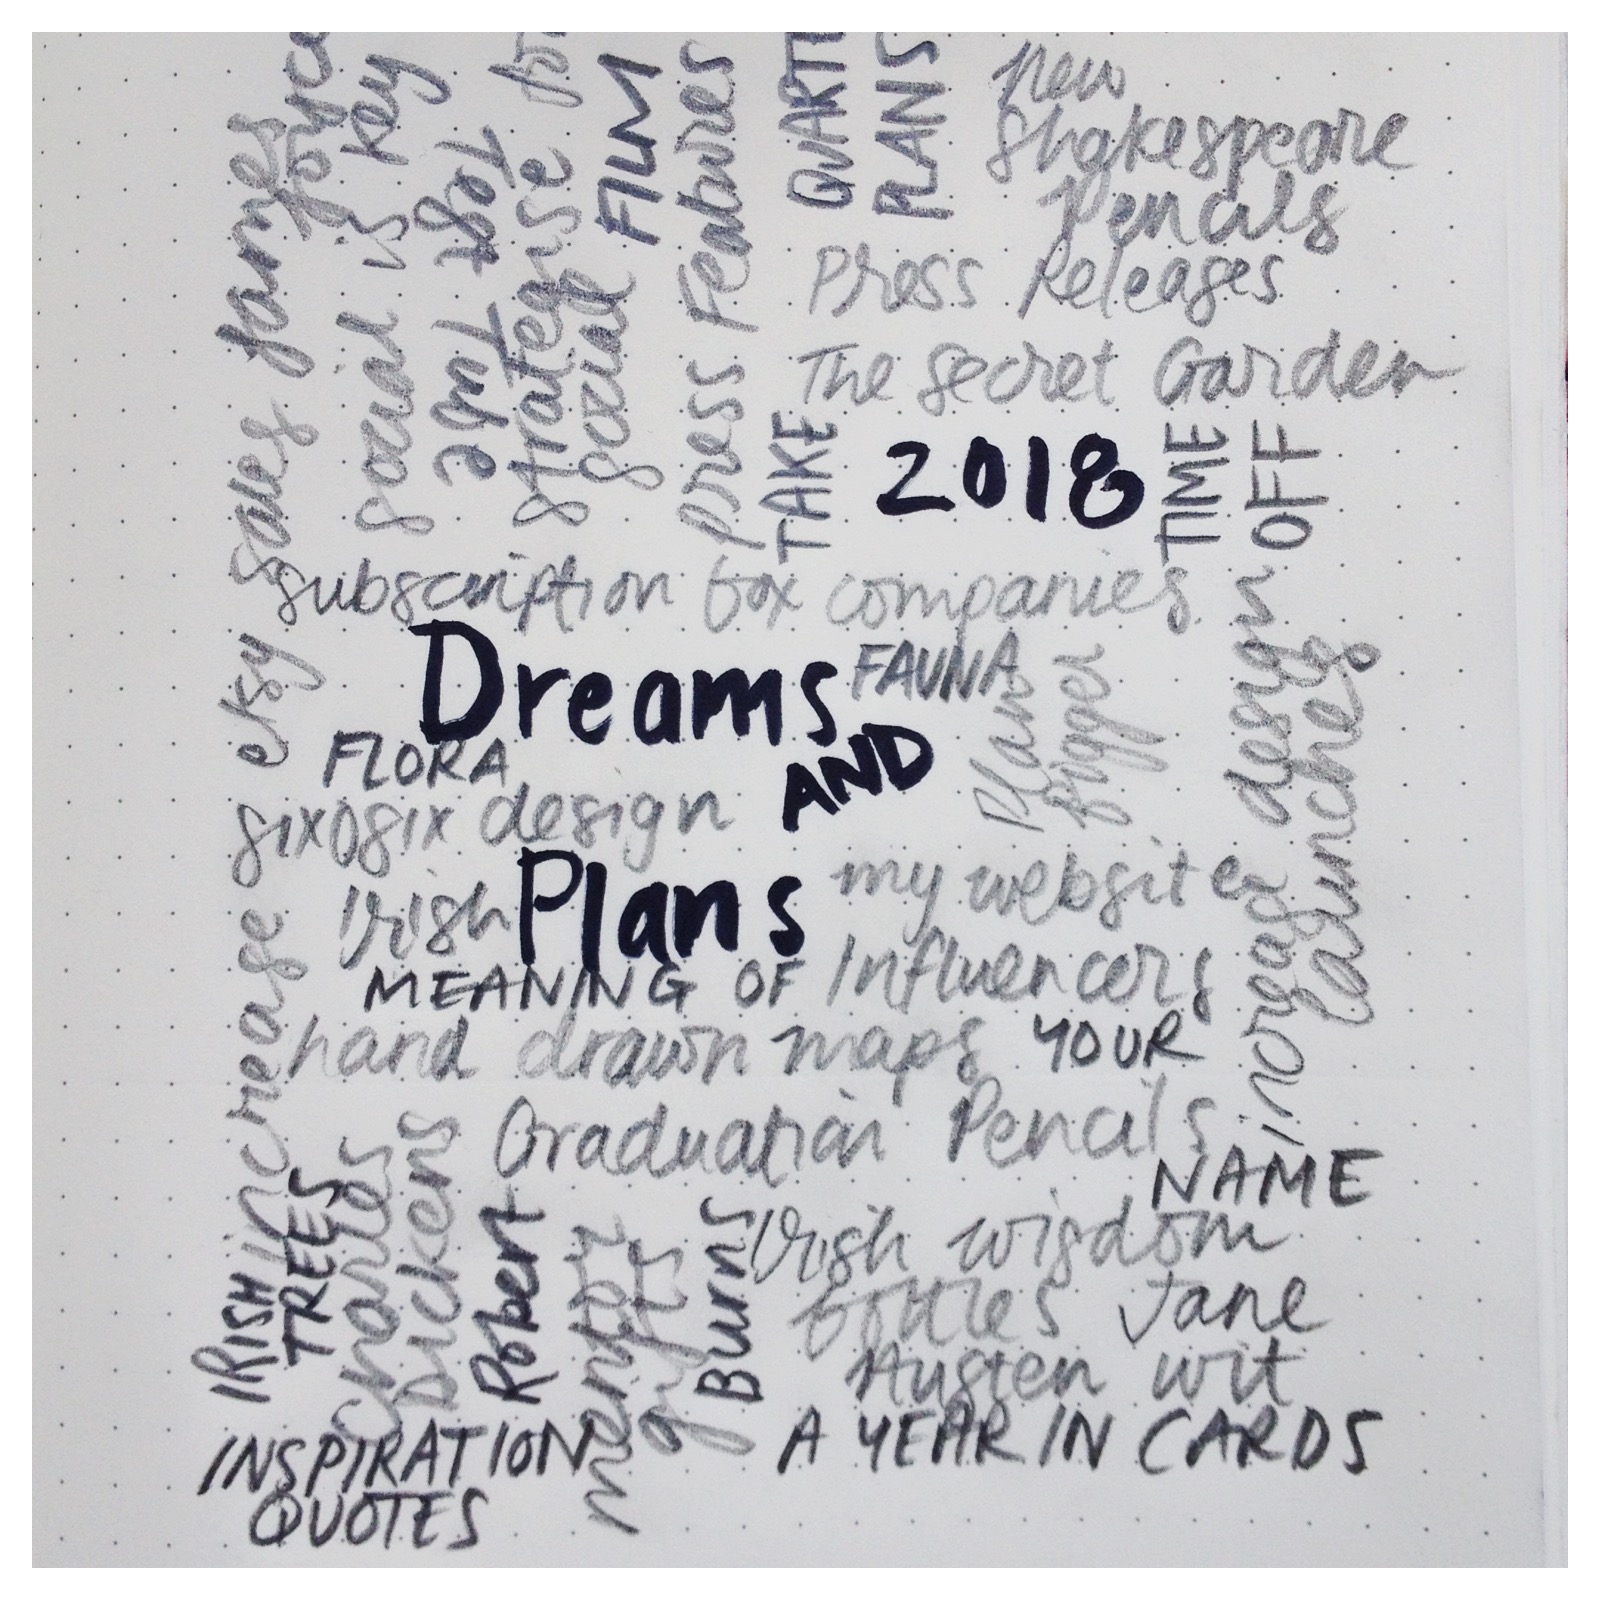 dreams plans and product ideas